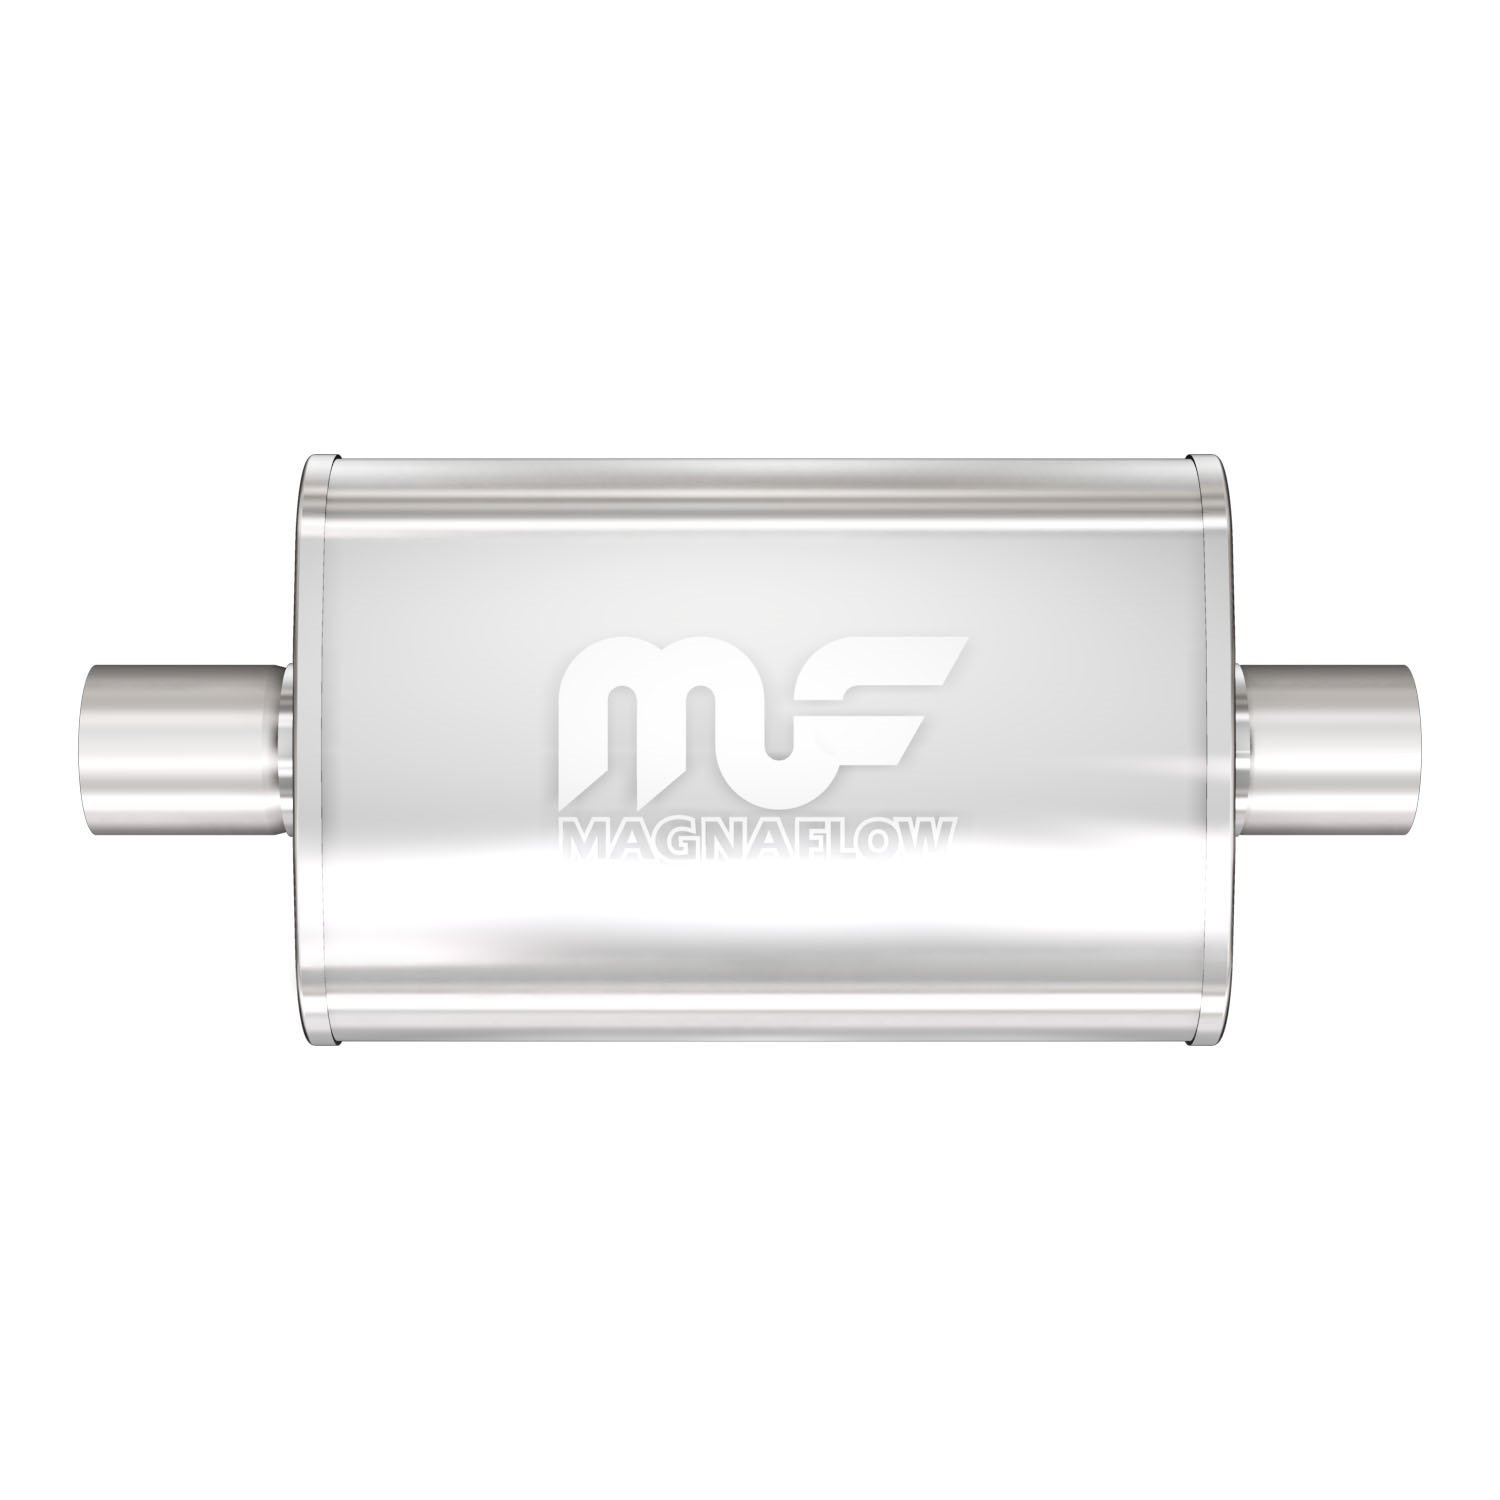 4" x 9" Oval Muffler Center In/Center Out: 3"/3" Body Length: 14" Overall Length: 20" Core Size: 3" Satin Finish